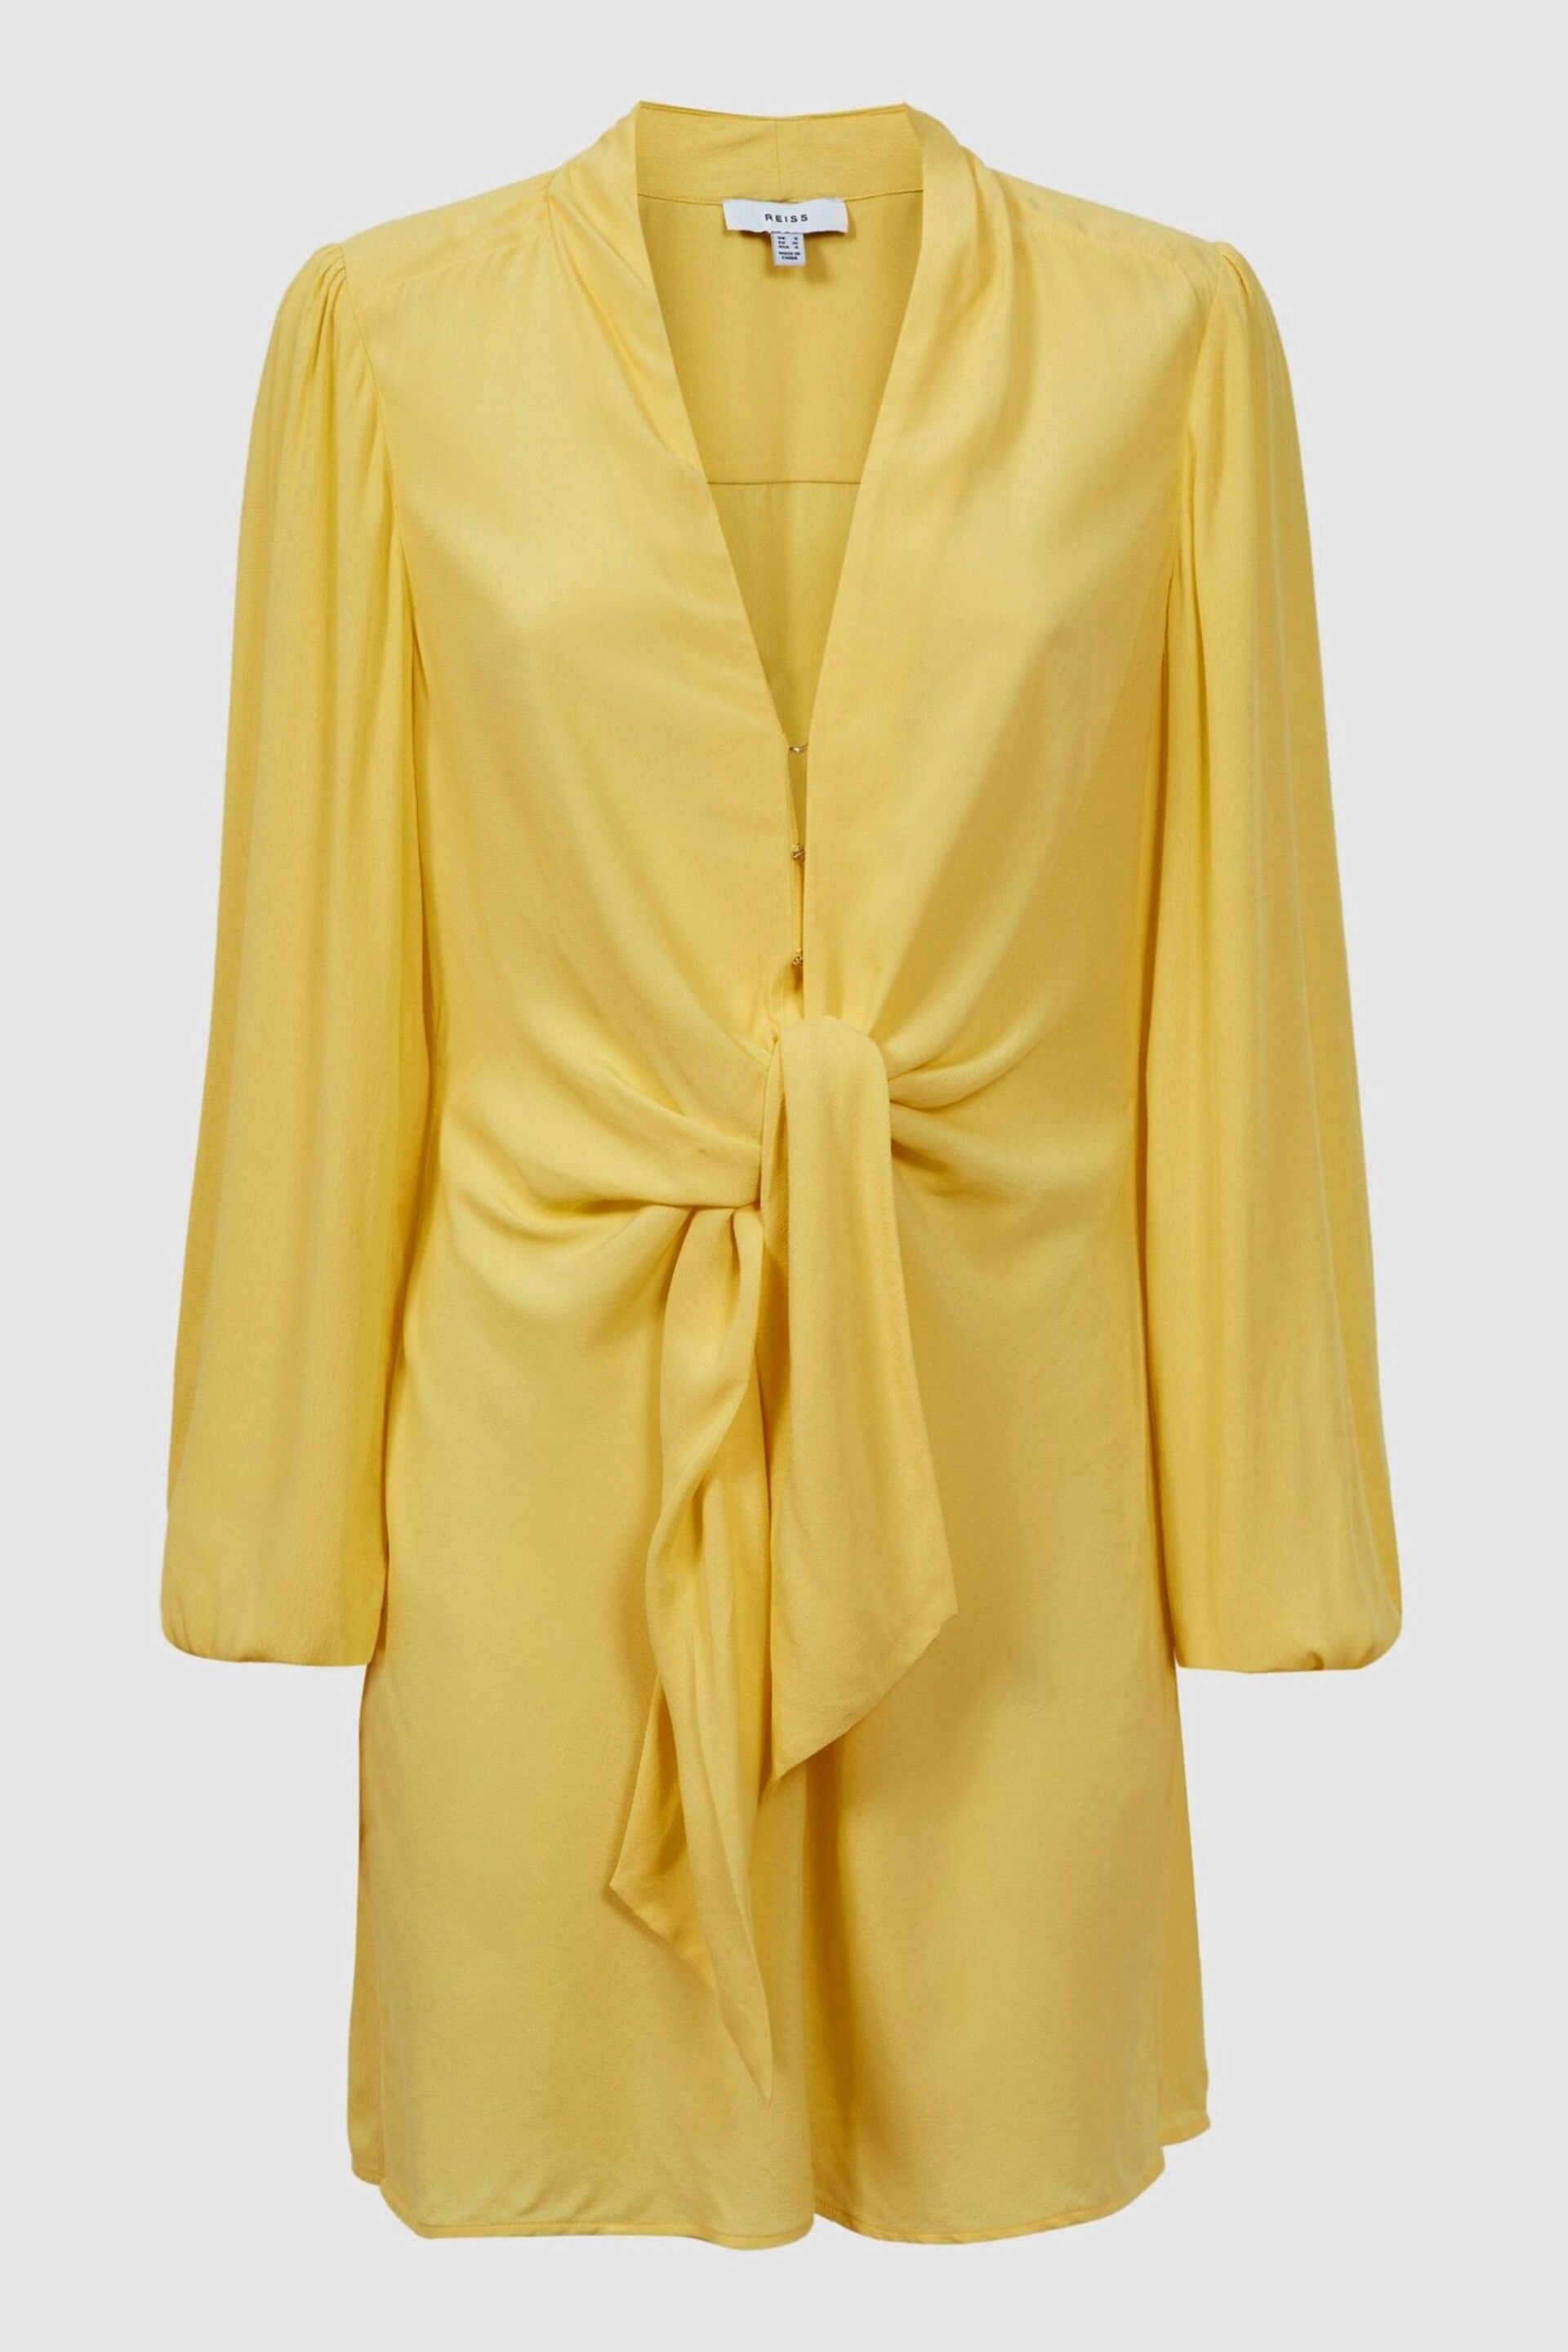 Reiss Yellow Mabel Tie Front Mini Dress - Image 2 of 5